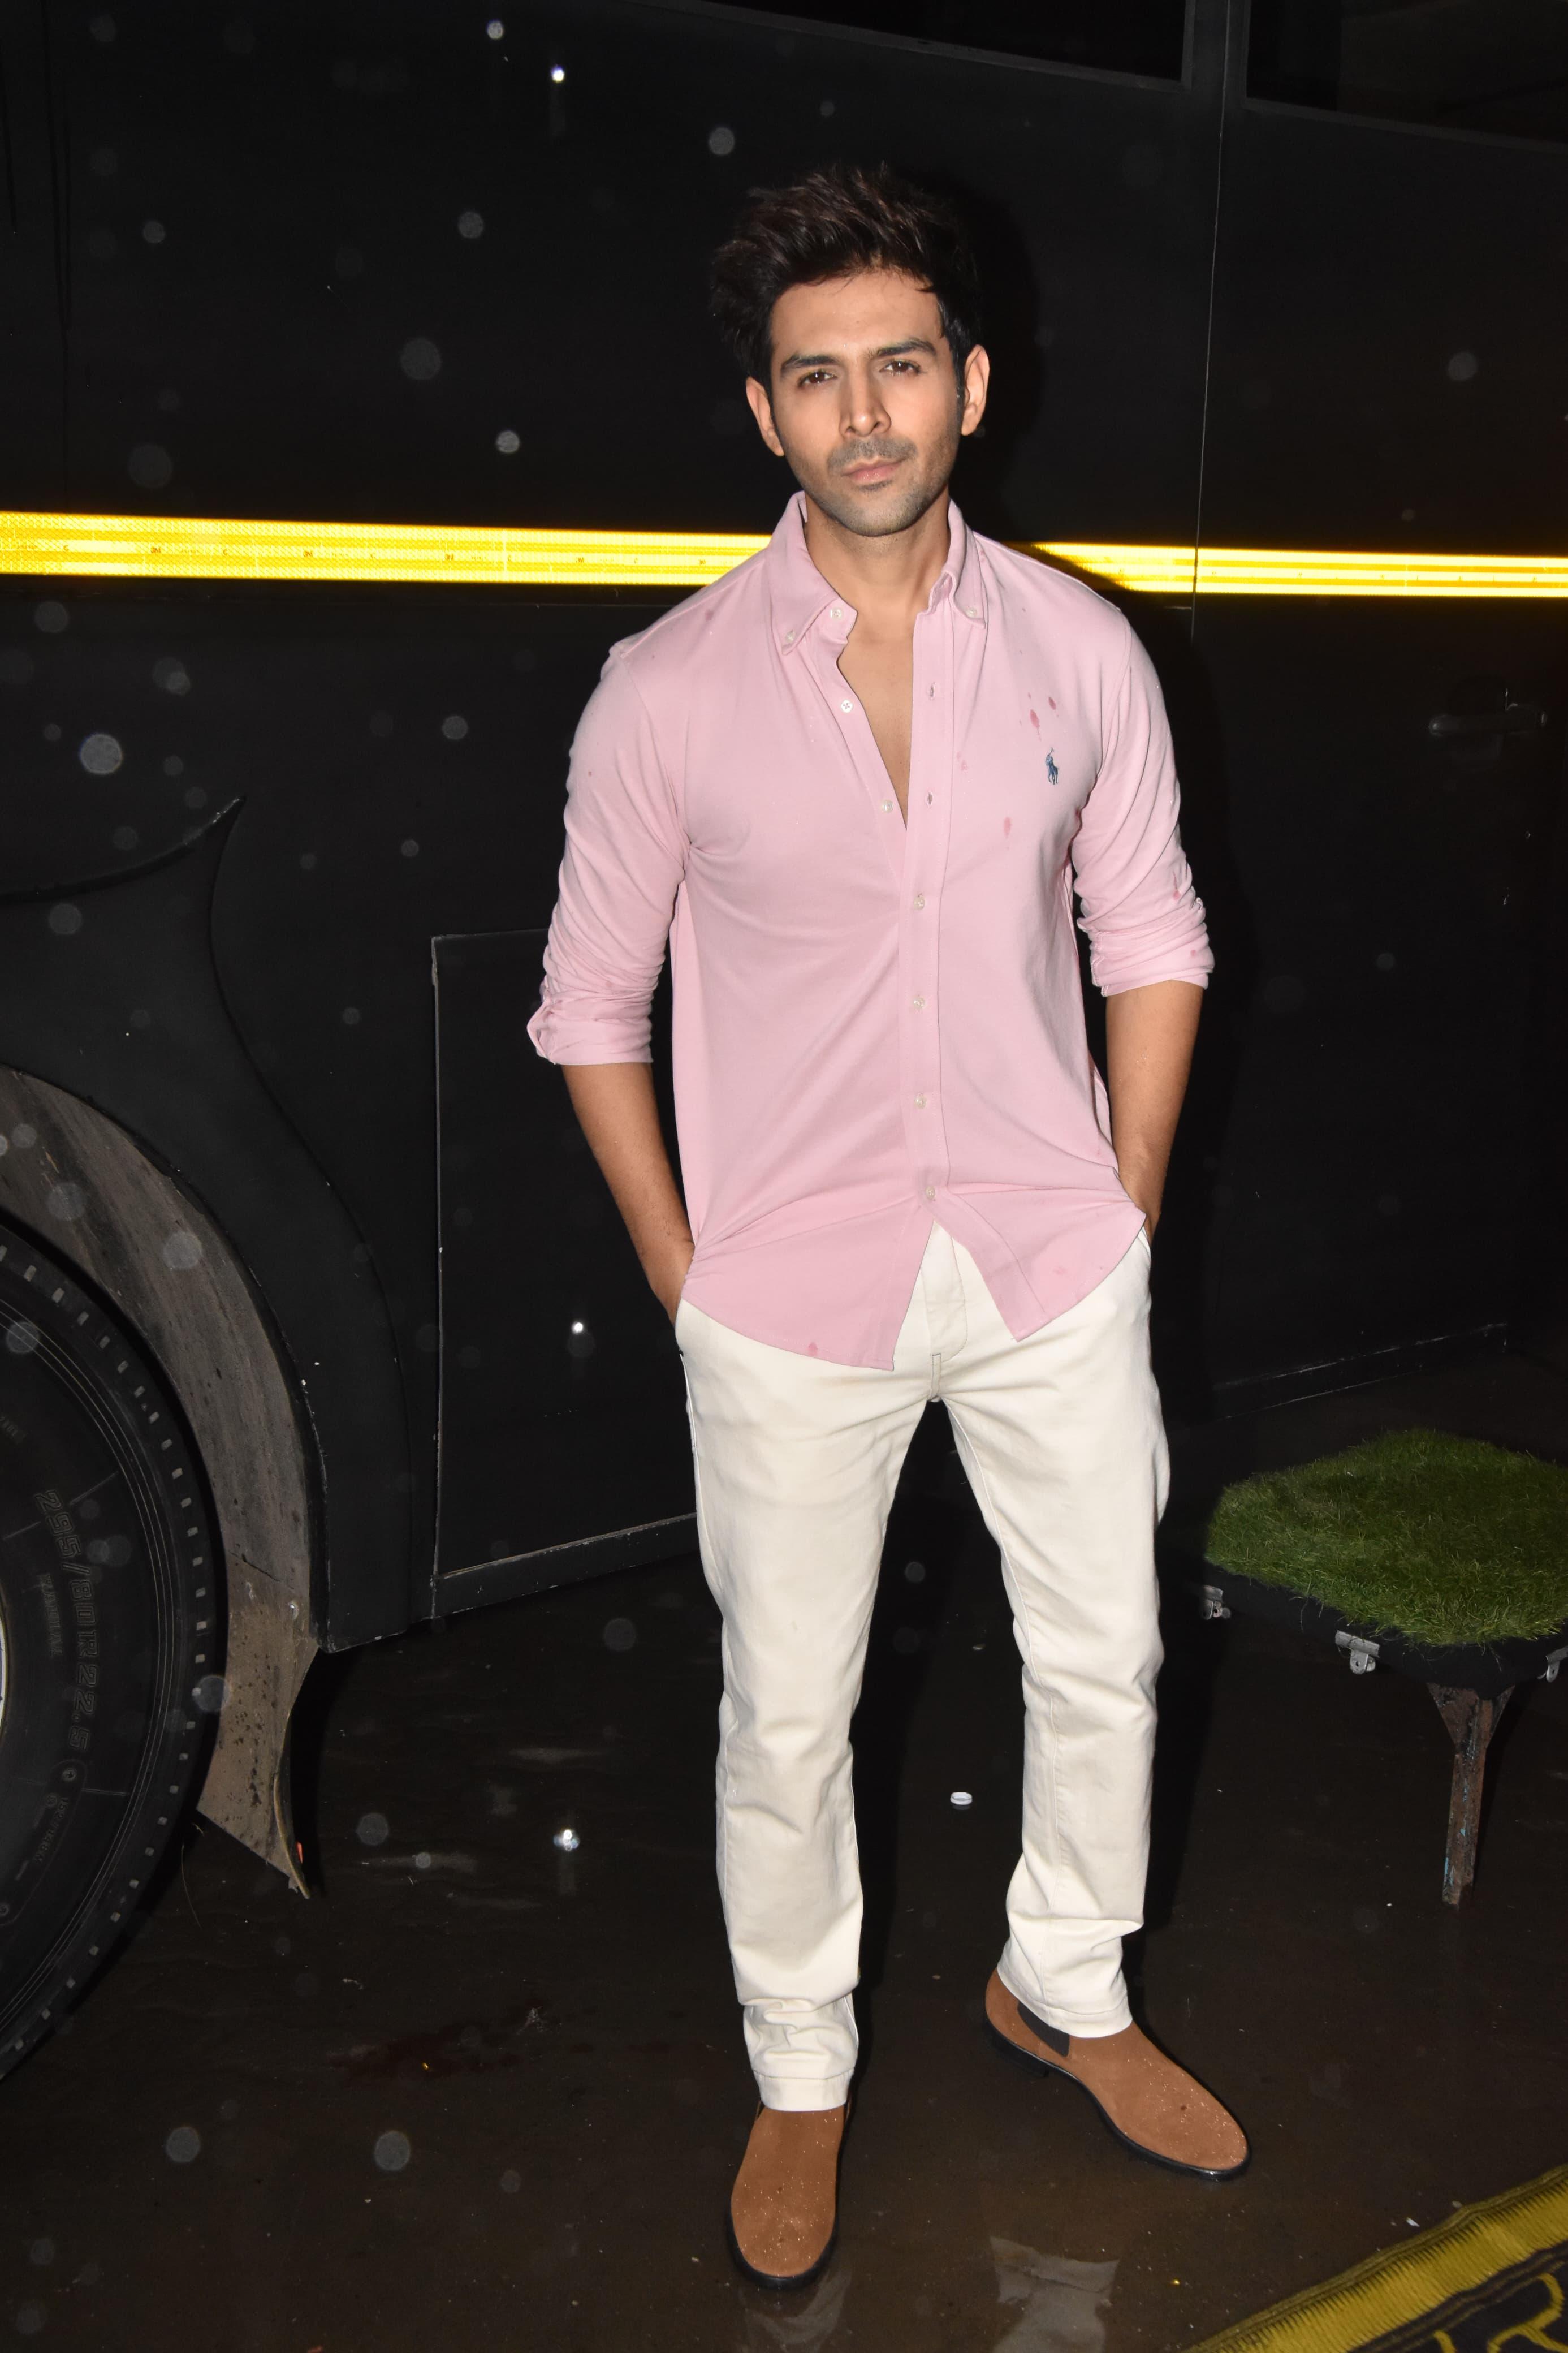 The actor looked dashing in his salmon-pink shirt and white pants